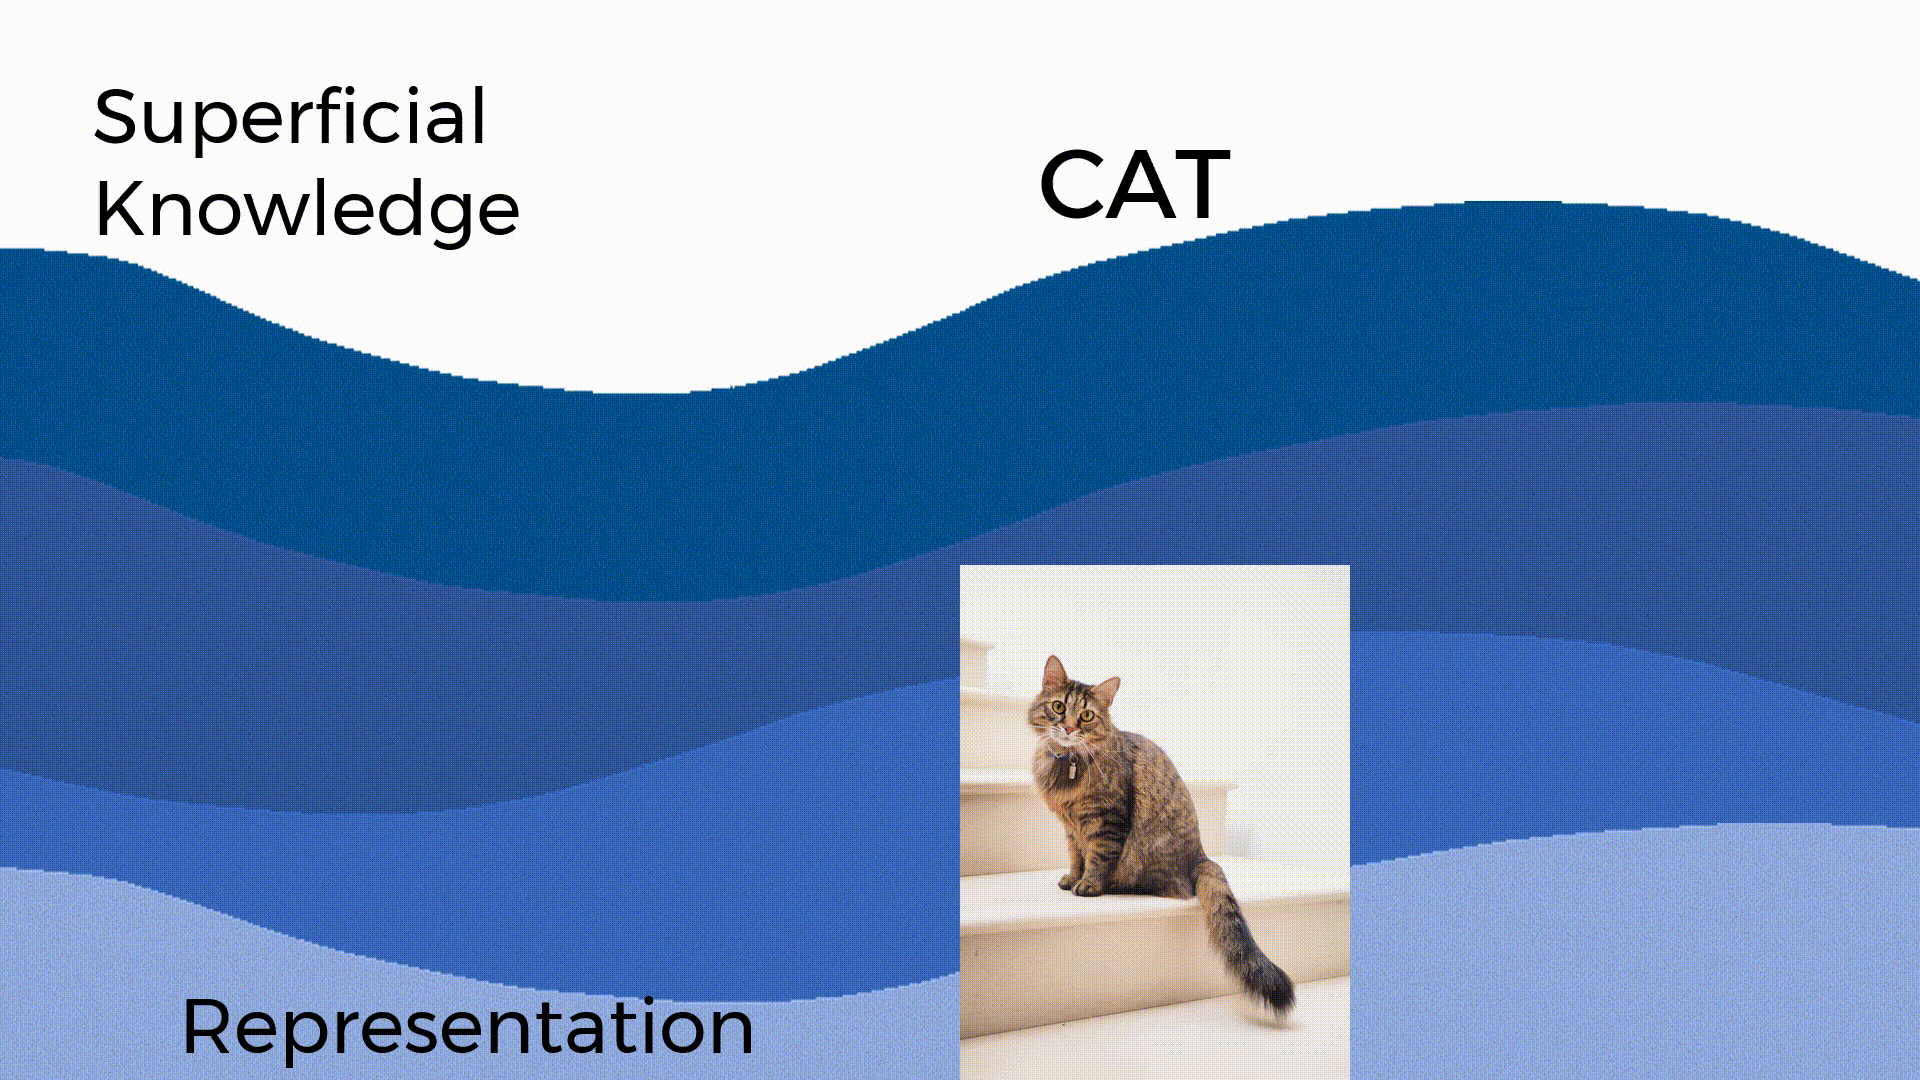 the letters "CAT" on the surface as superficial knowledge, but down in the water is a picture of a cat as a representation of reality